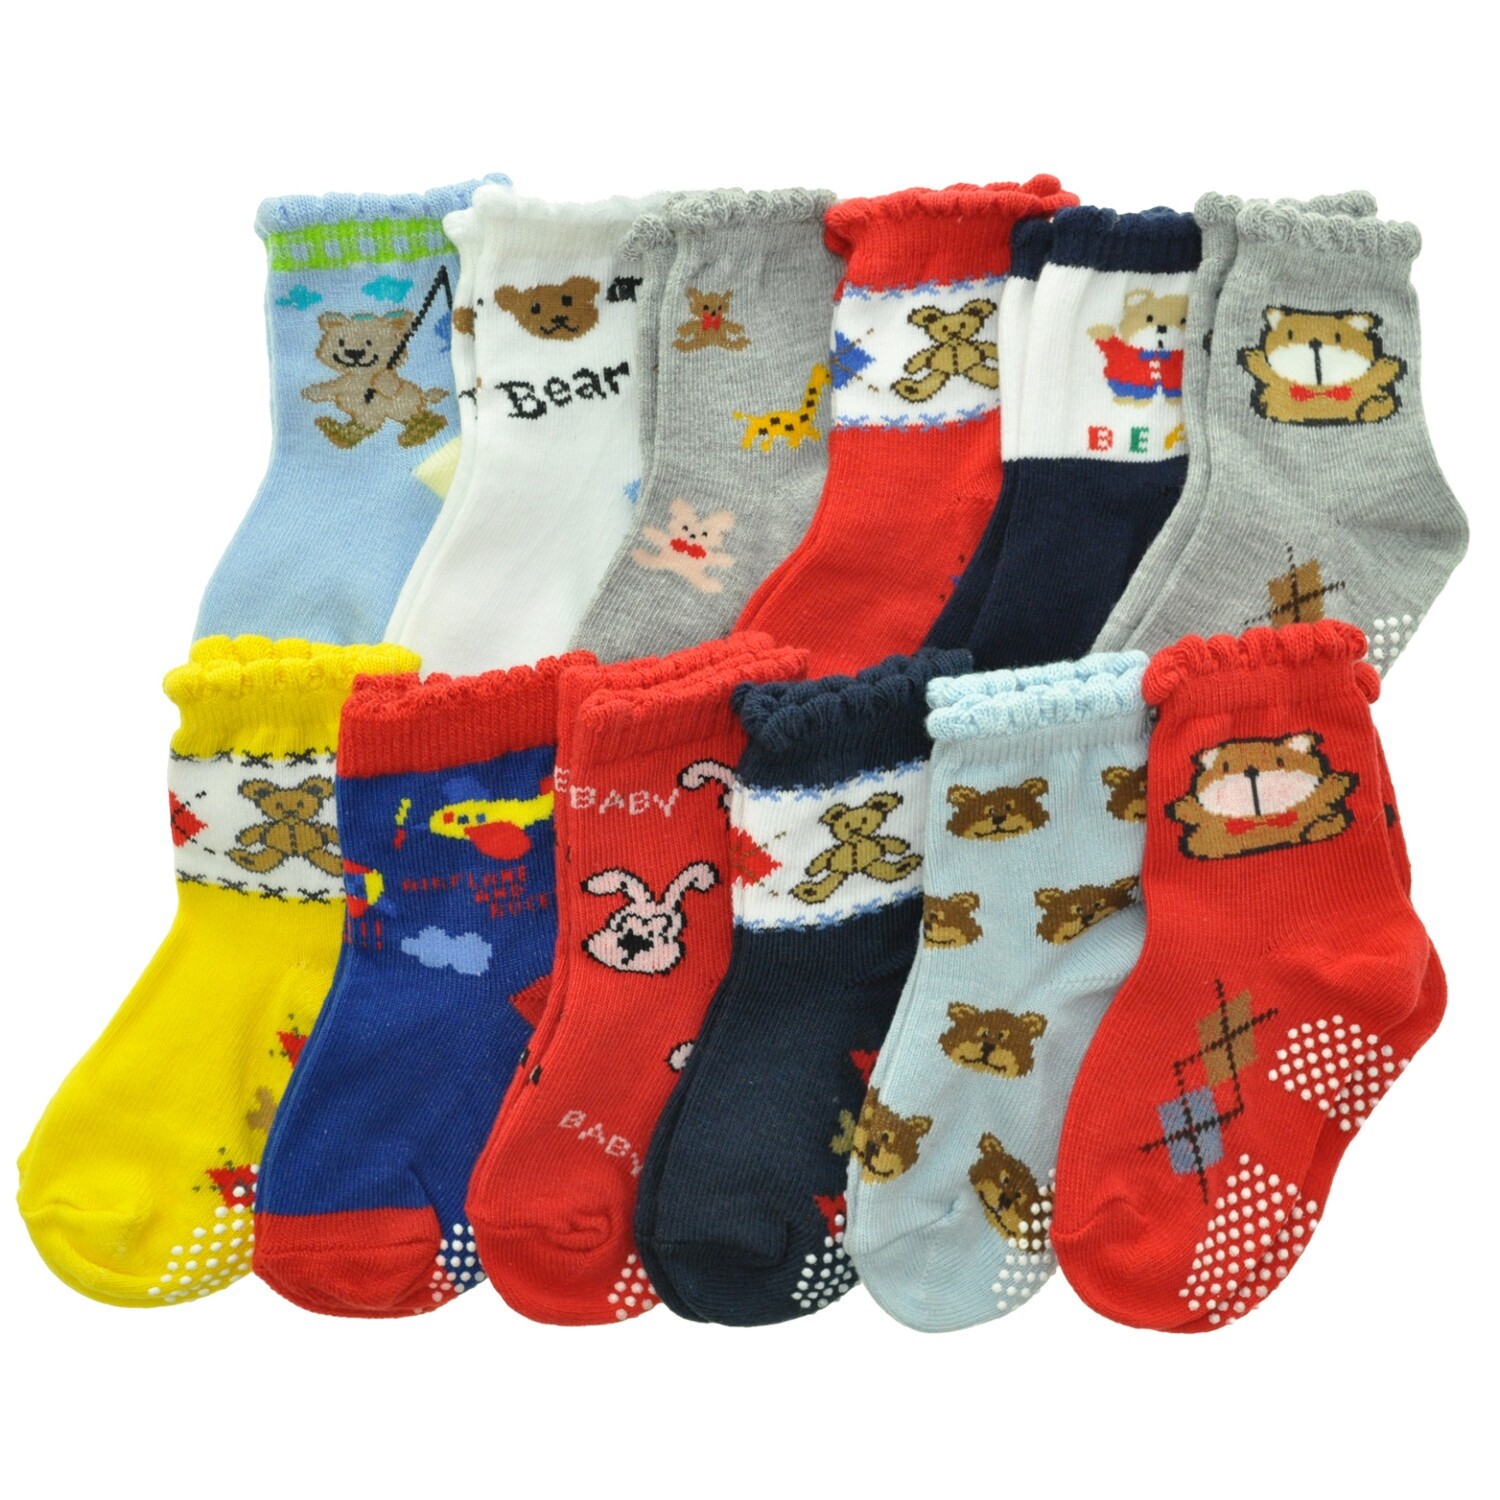 . Case of [120] Angelina Baby Boys' Cotton Blend Socks - Assorted Colors & Designs, 12-24M .